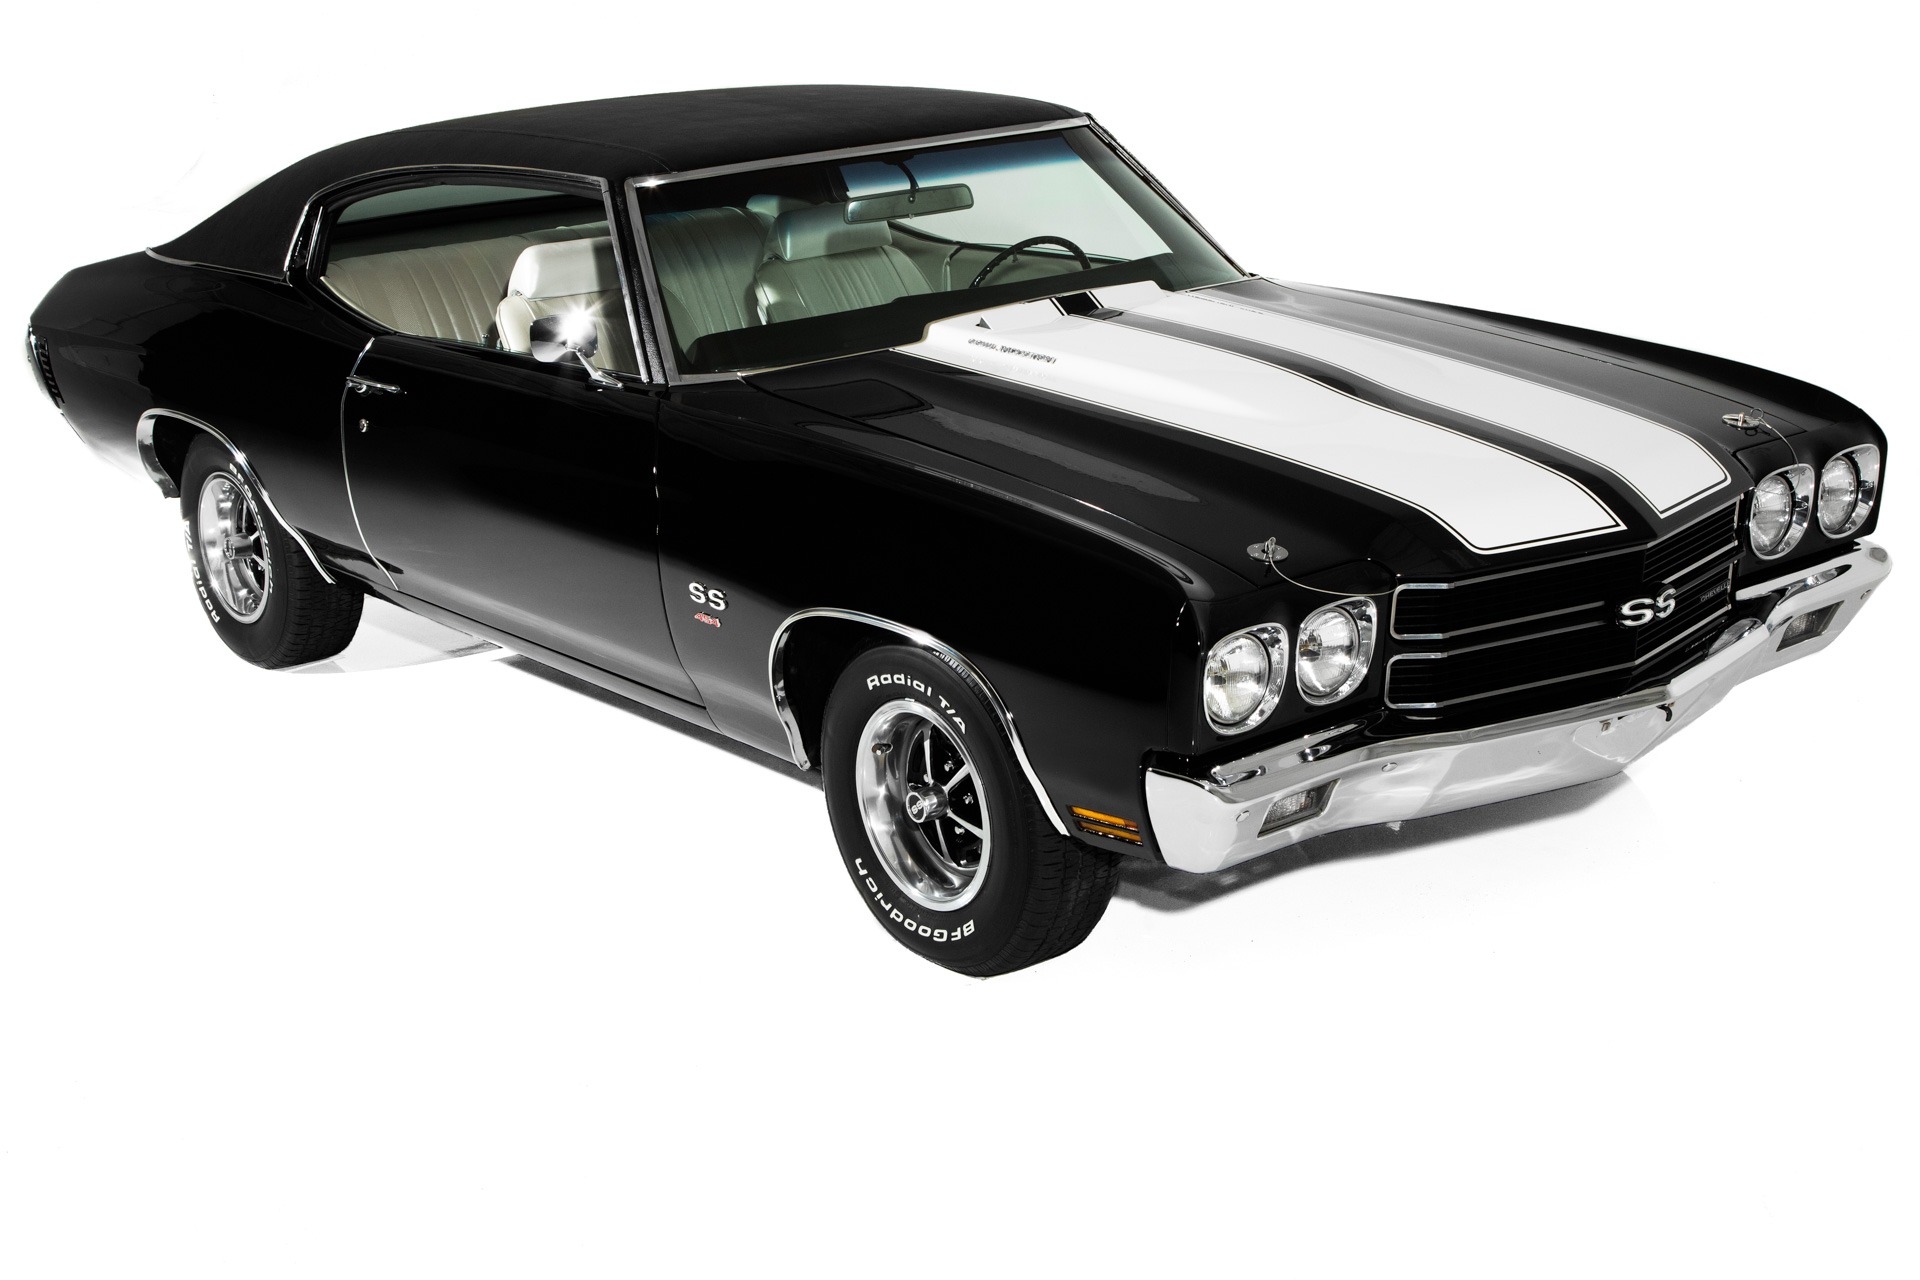 For Sale Used 1970 Chevrolet Chevelle #s Match 454 Build sheet | American Dream Machines Des Moines IA 50309